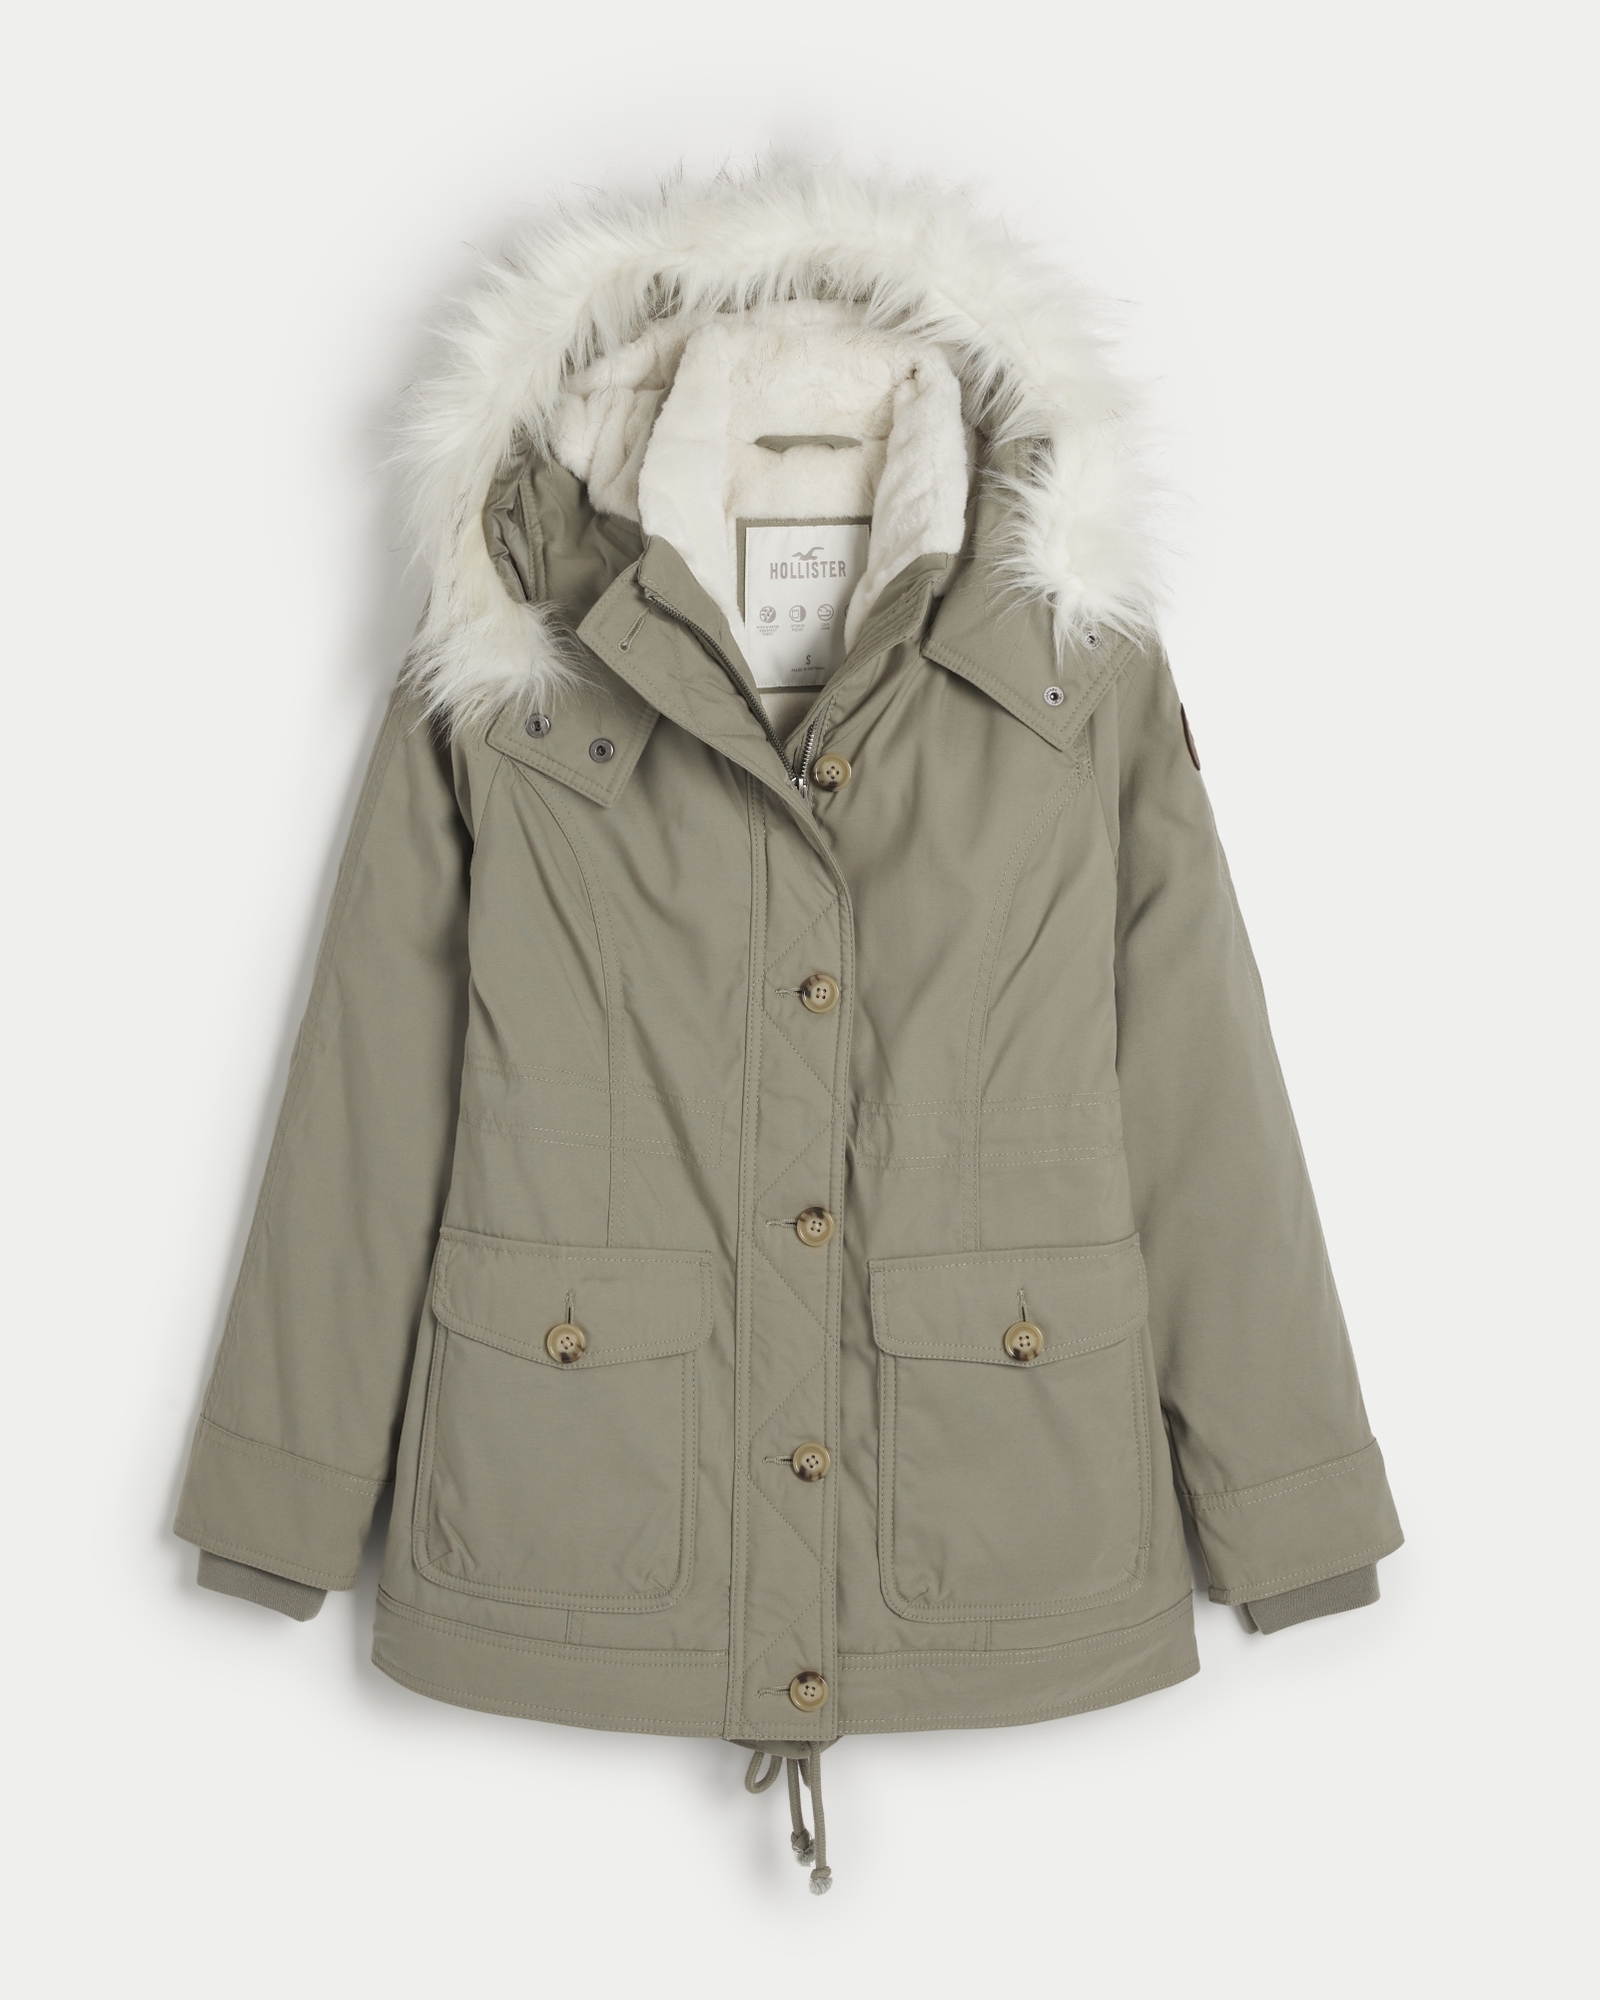 Hollister teddy lined parka jacket with faux fur hood